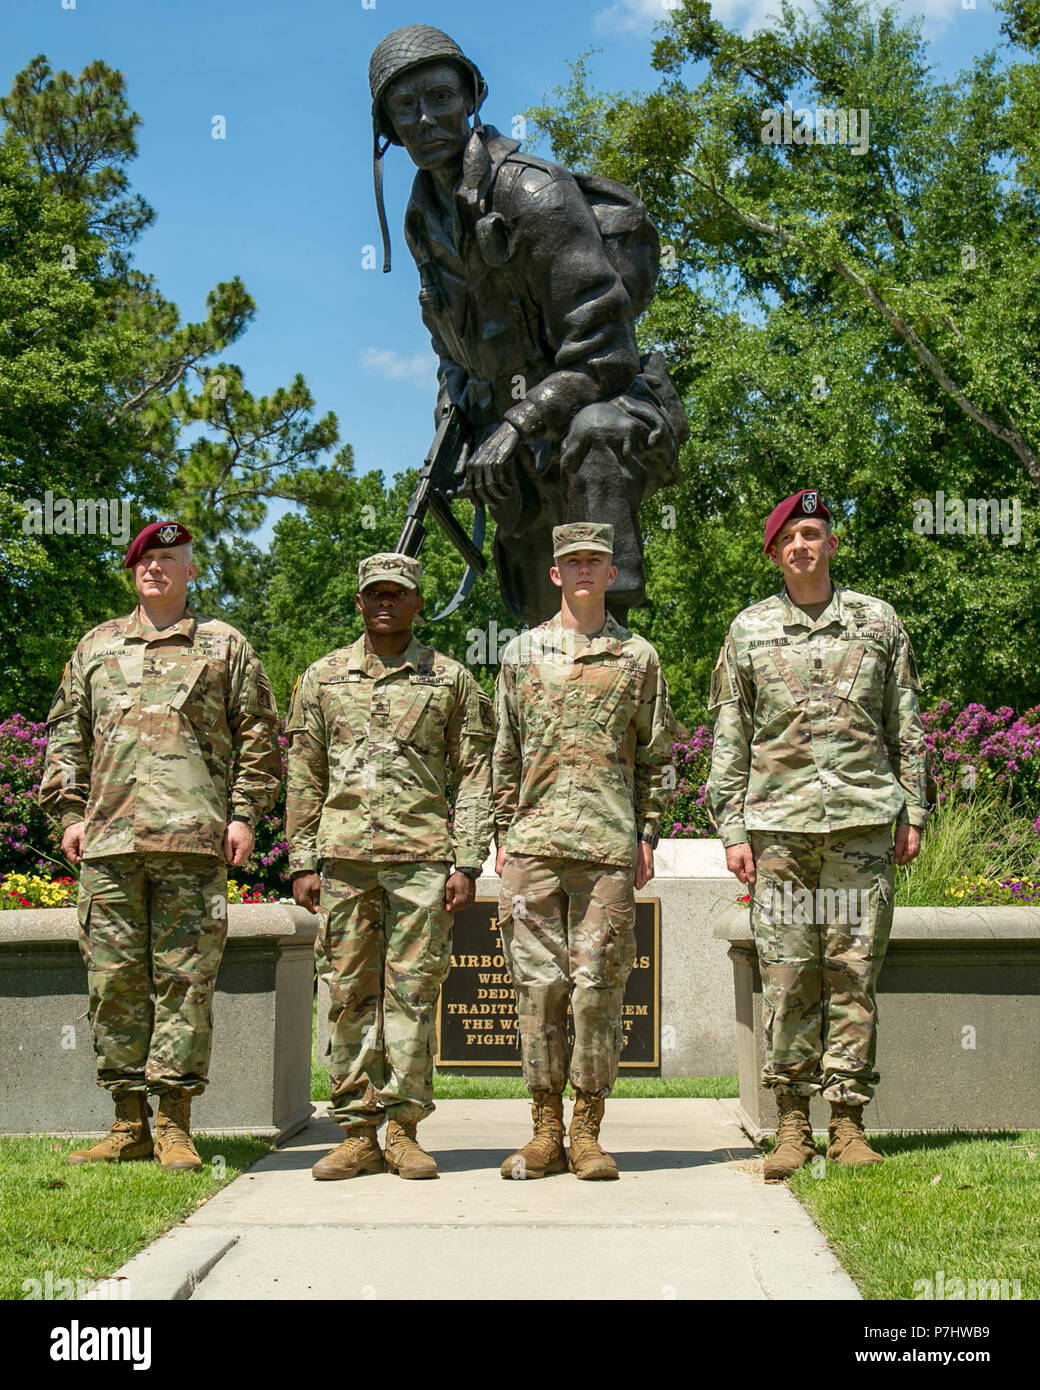 From left to right Lt. Gen. Paul J. LaCamera, Staff Sgt. Ifegwu Ifegwu,  Pfc. Cadem J. Emmons, Command Sgt. Maj. Charles W. Albertson pose for a  photo after Best Warrior Competition awards